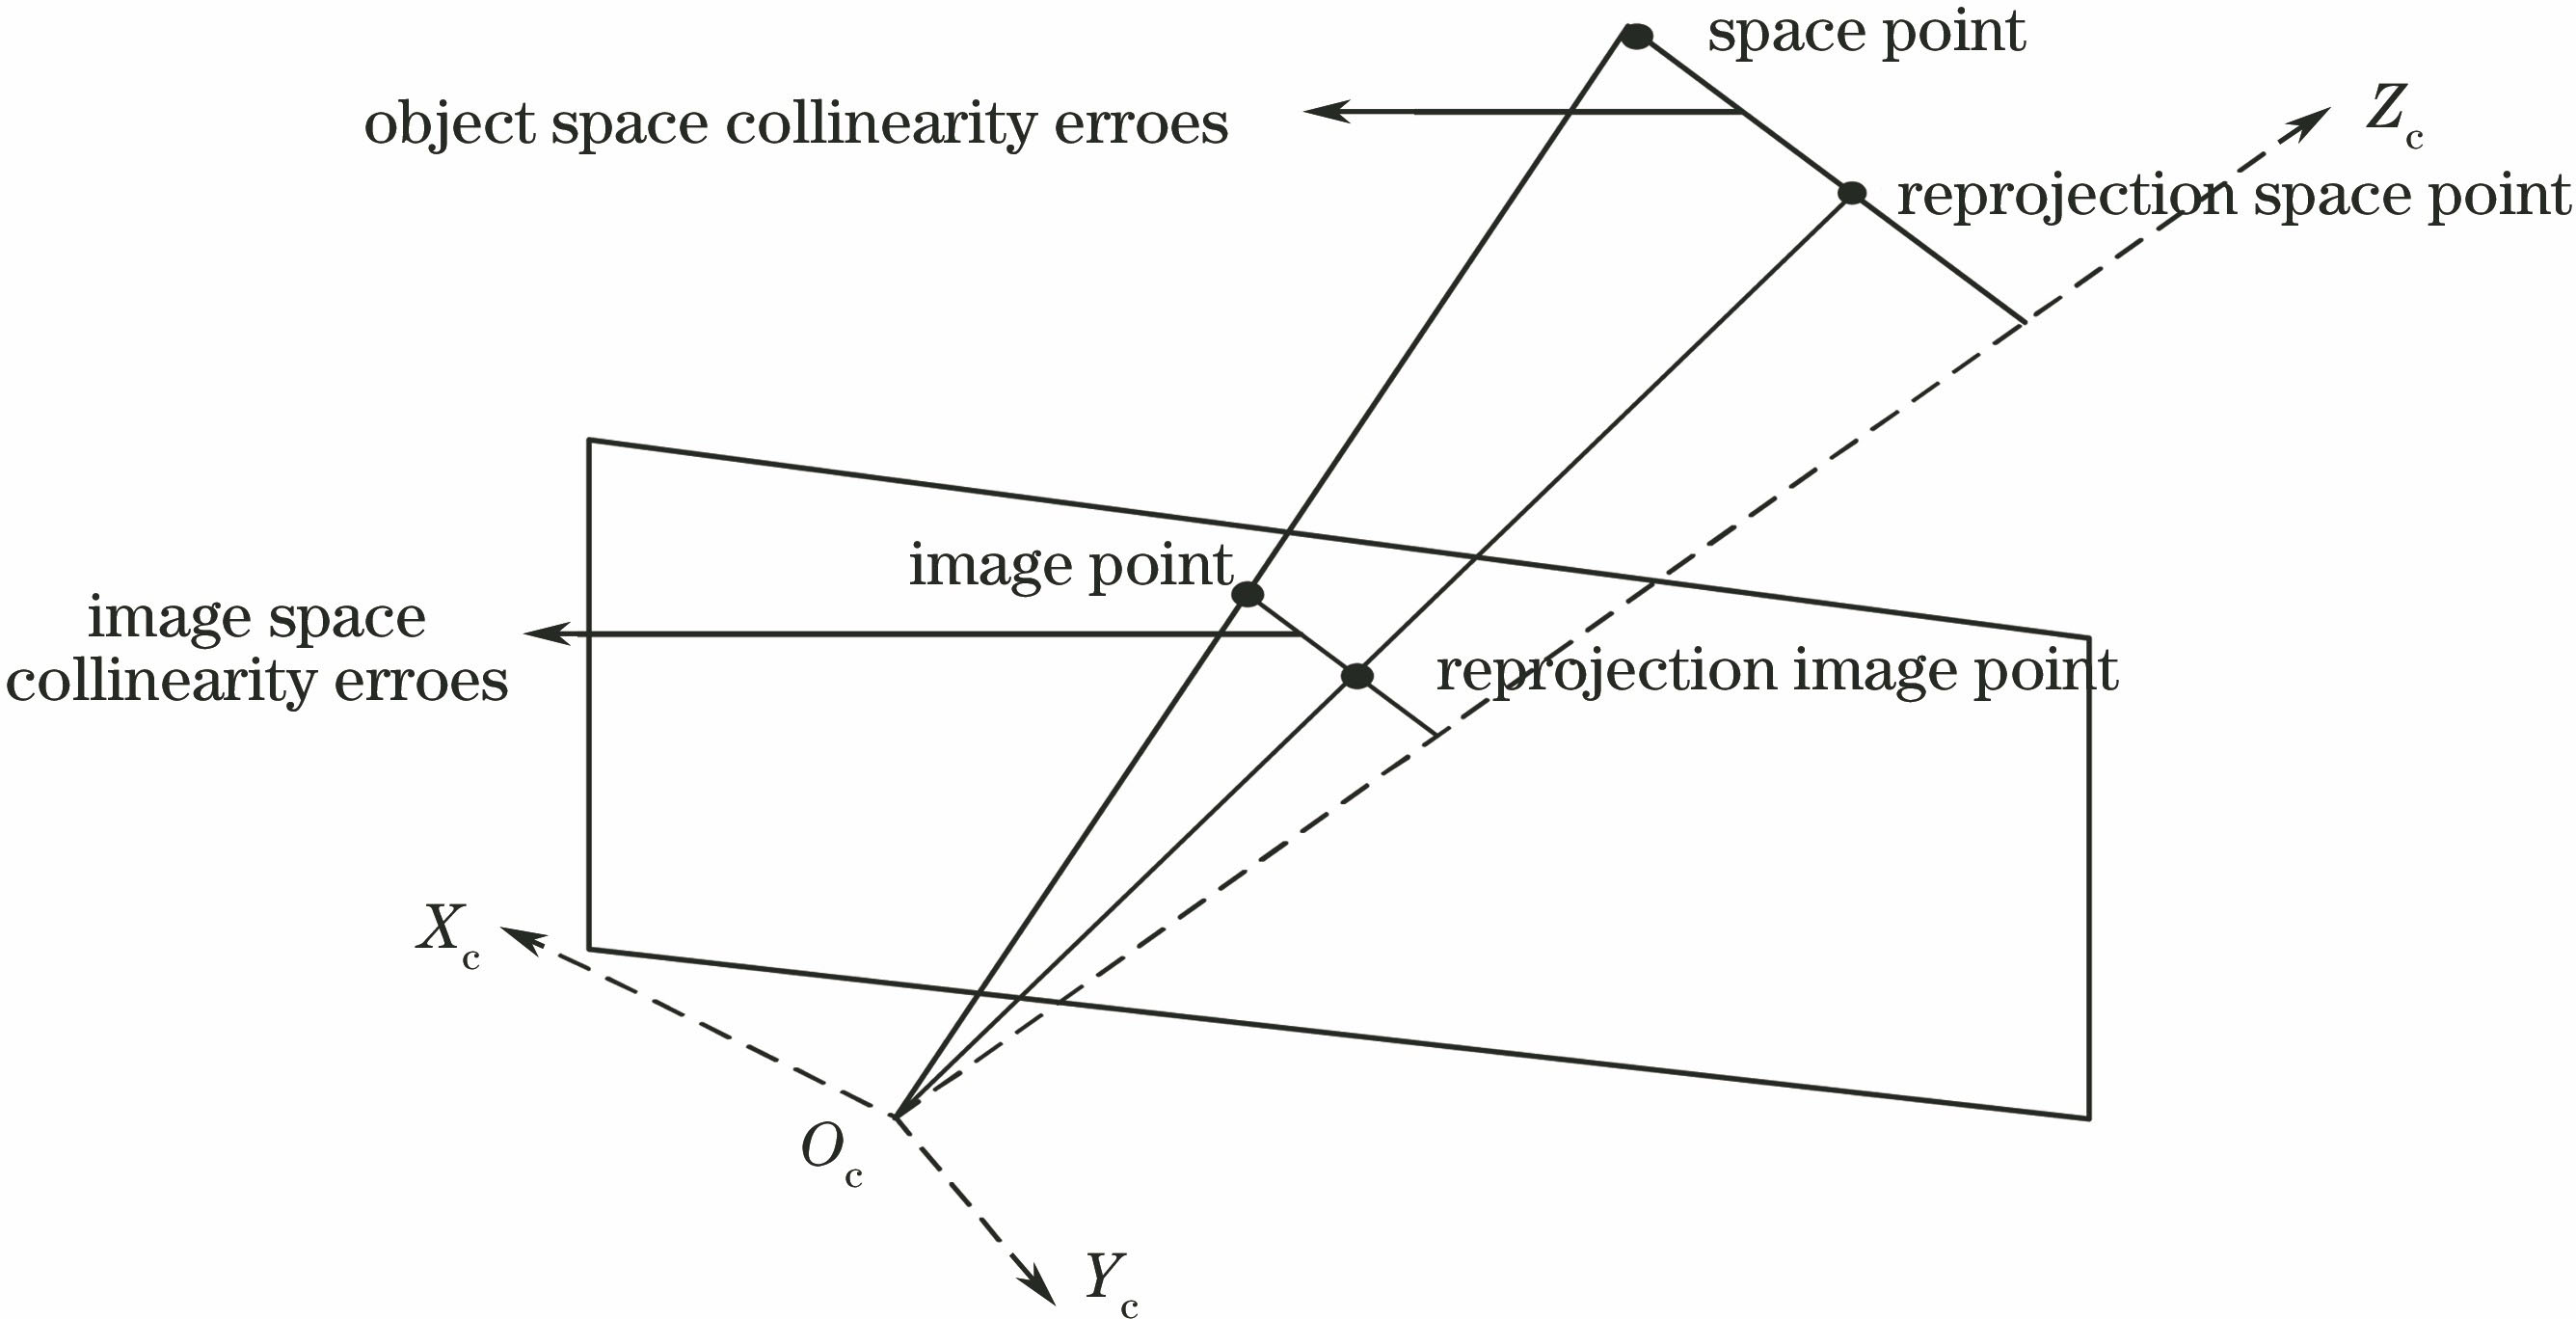 Geometric meaning of object residuals and image residuals in camera pose estimation